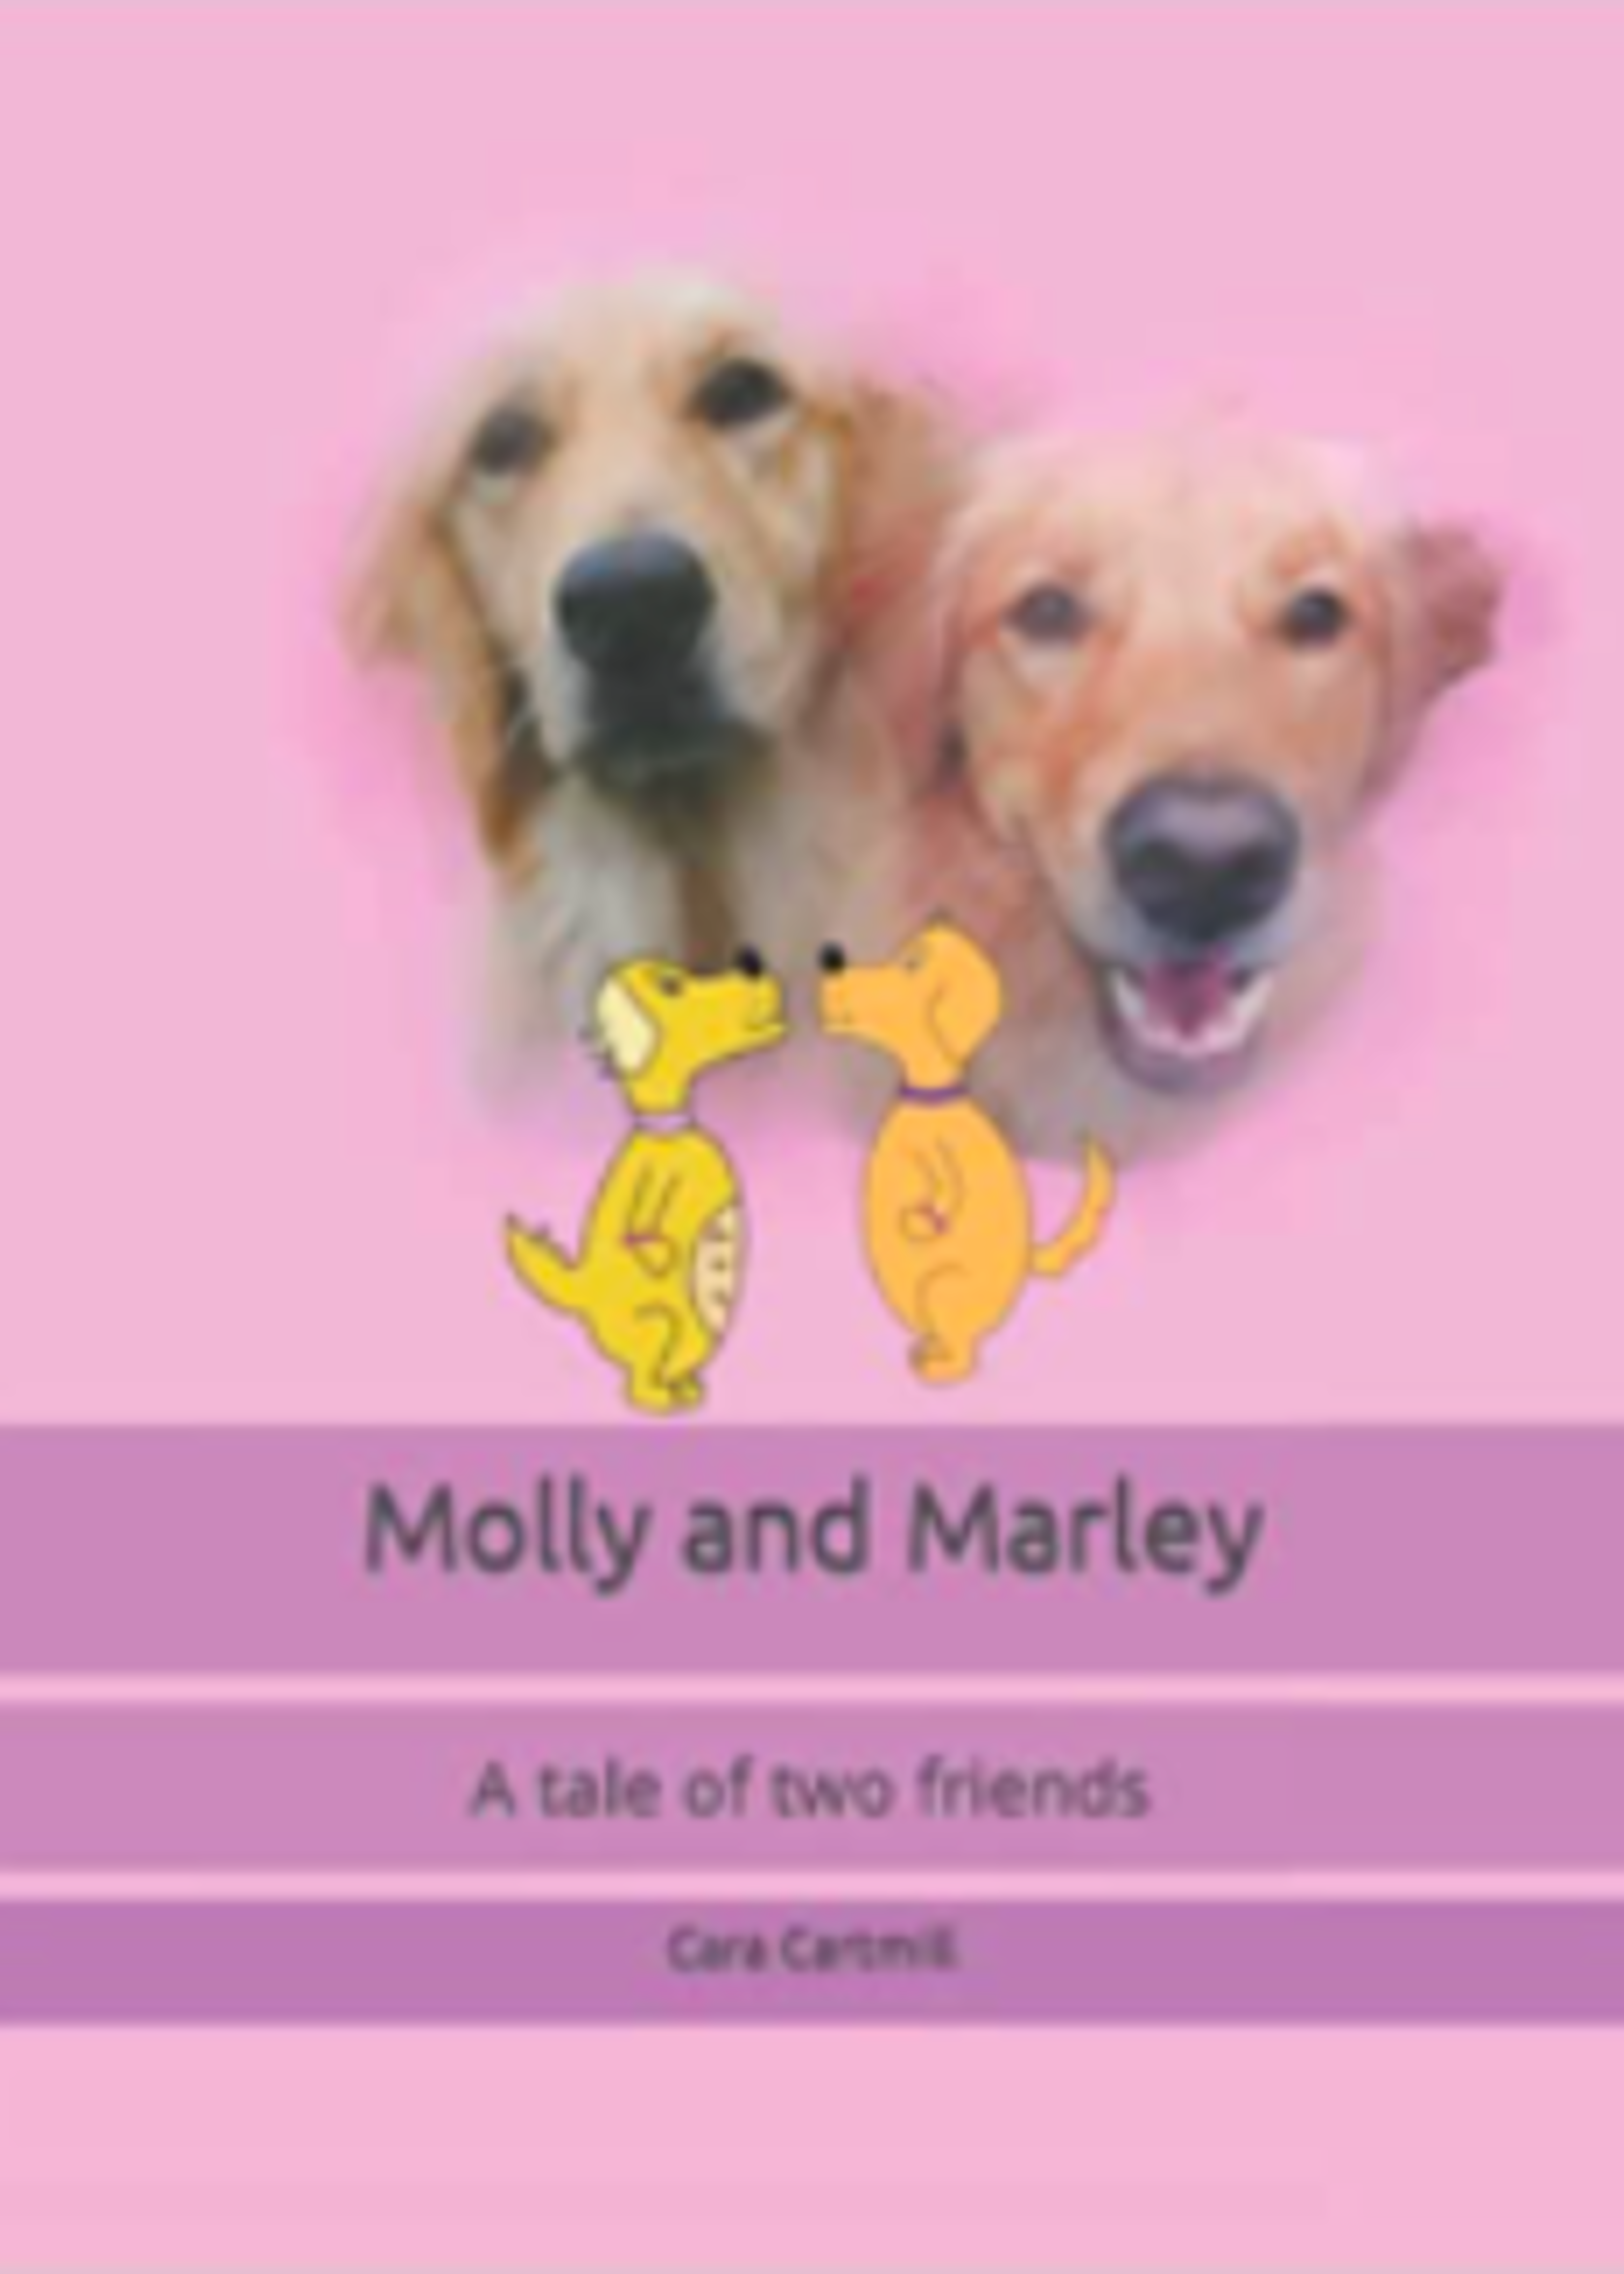 Molly and Marley: A Tale of Two Friends by Cara Cartmill